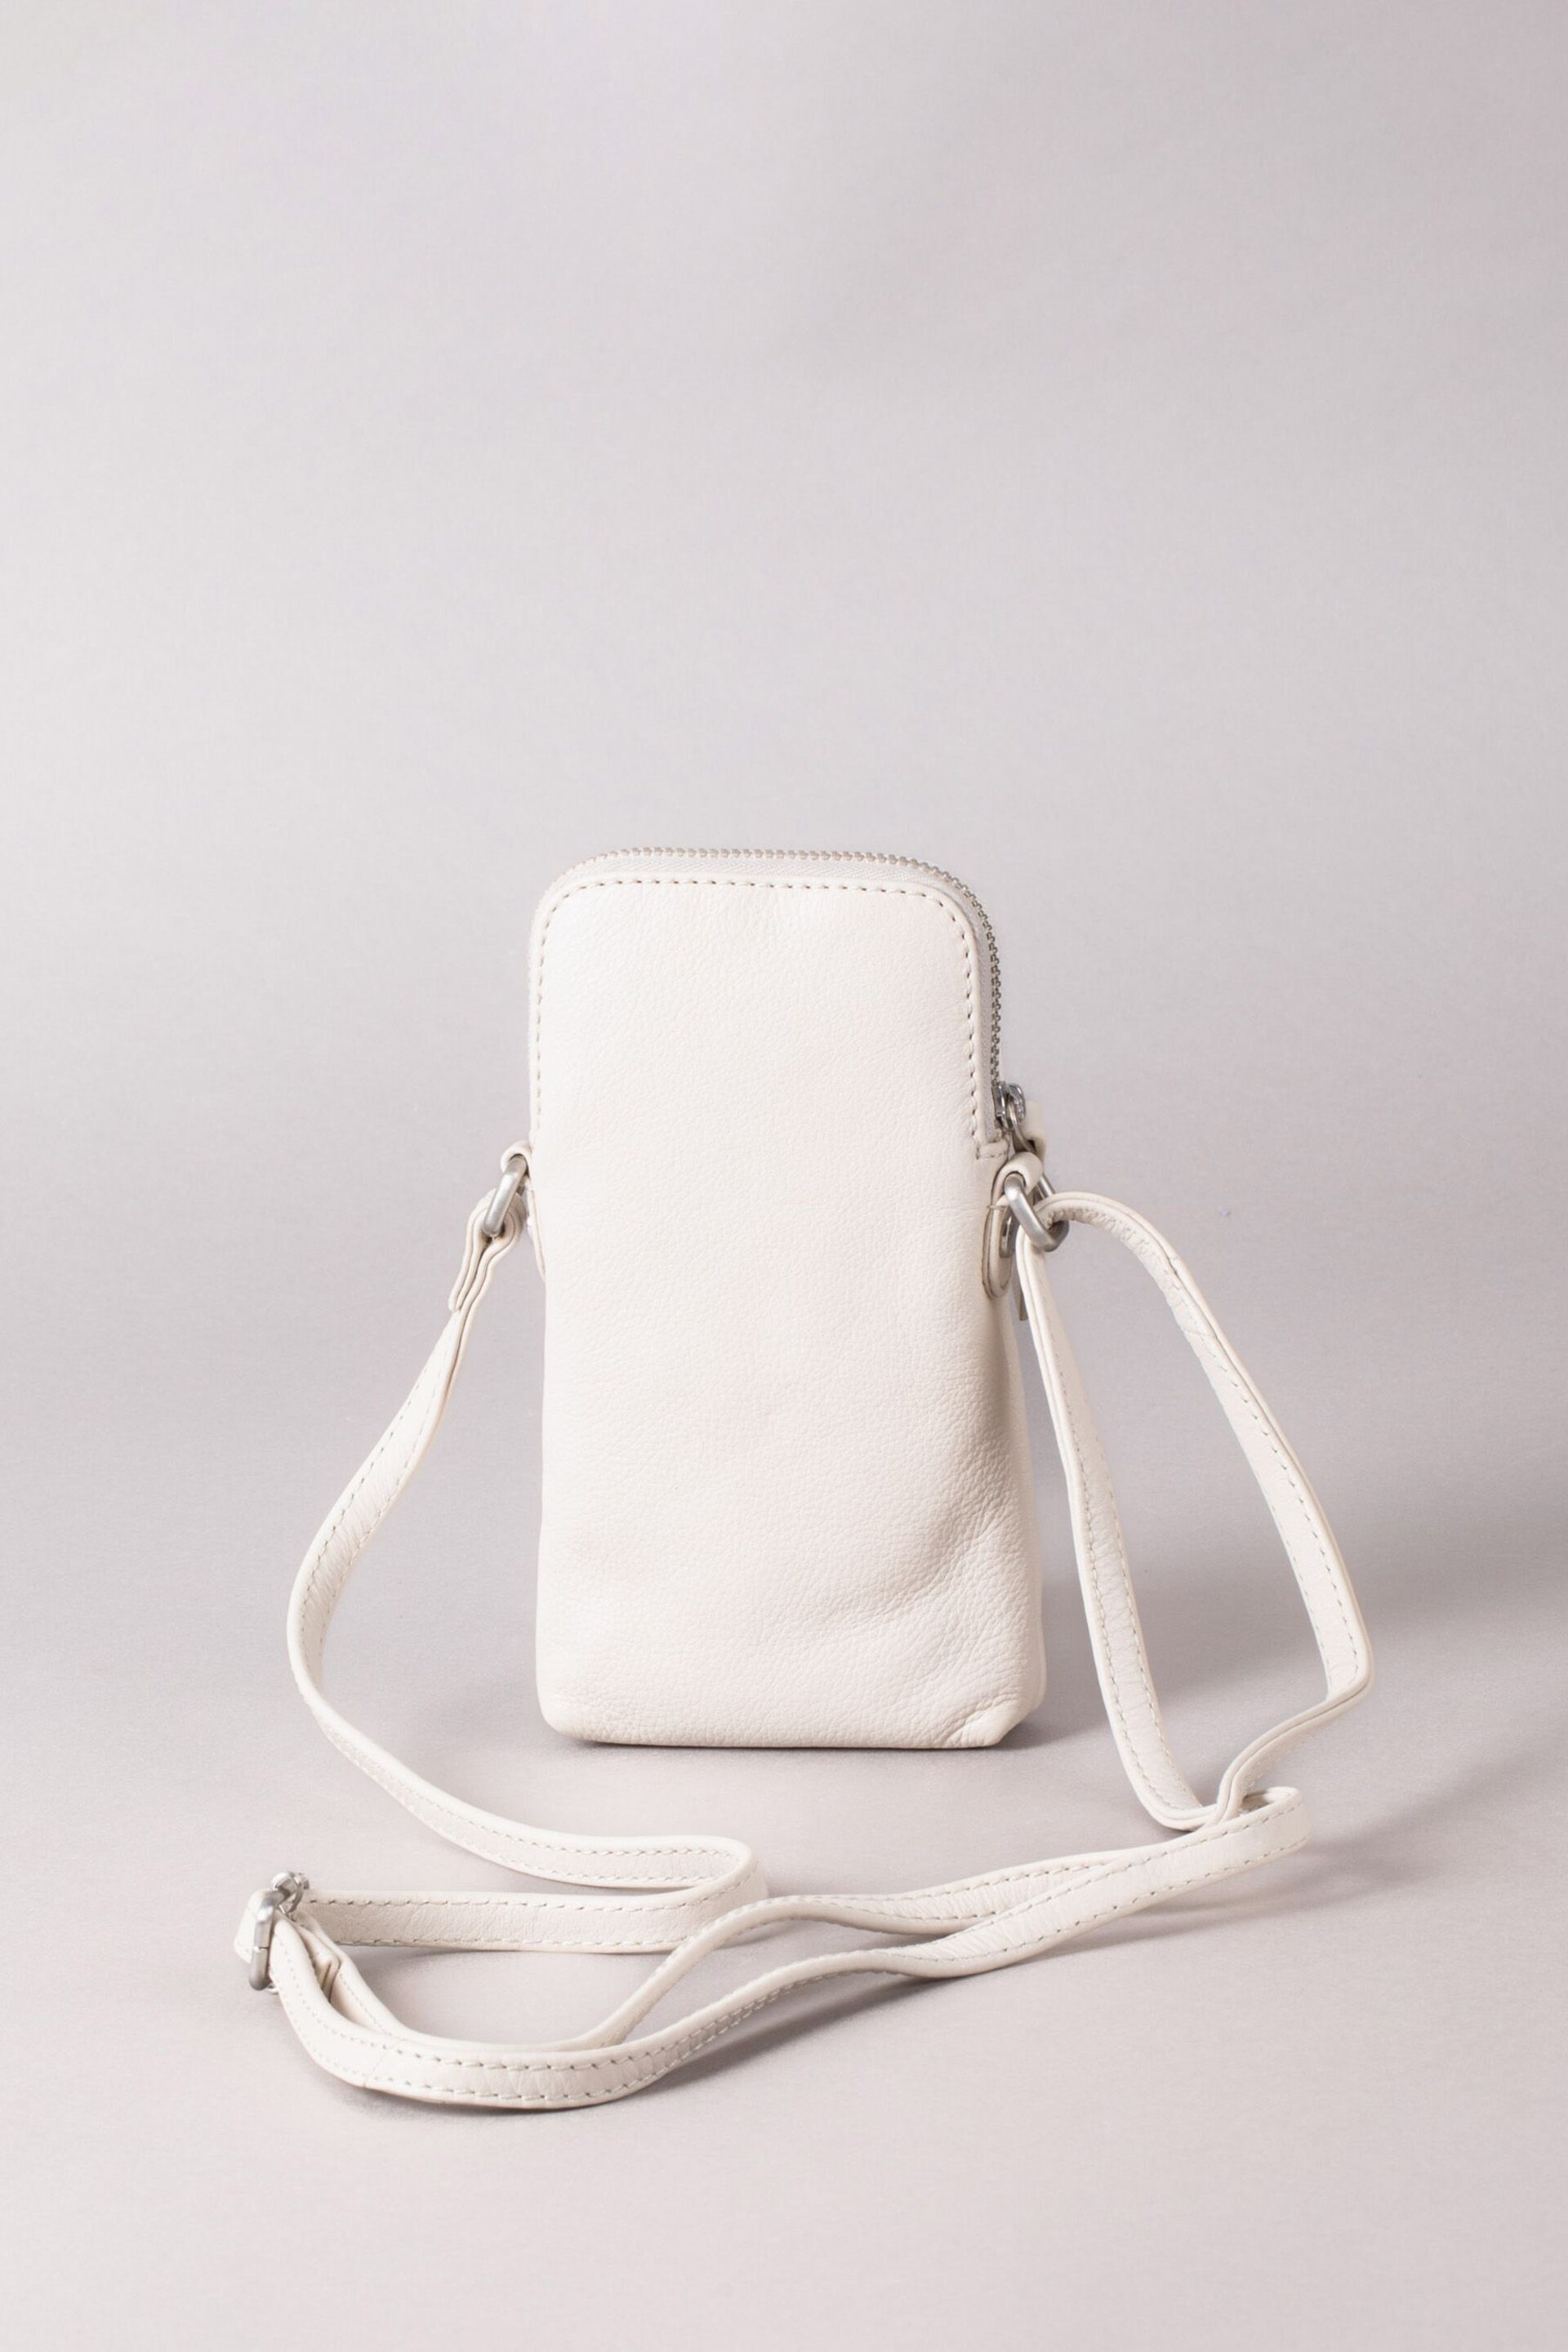 Lakeland Leather White Coniston Leather Cross-Body Phone Pouch - Image 3 of 6